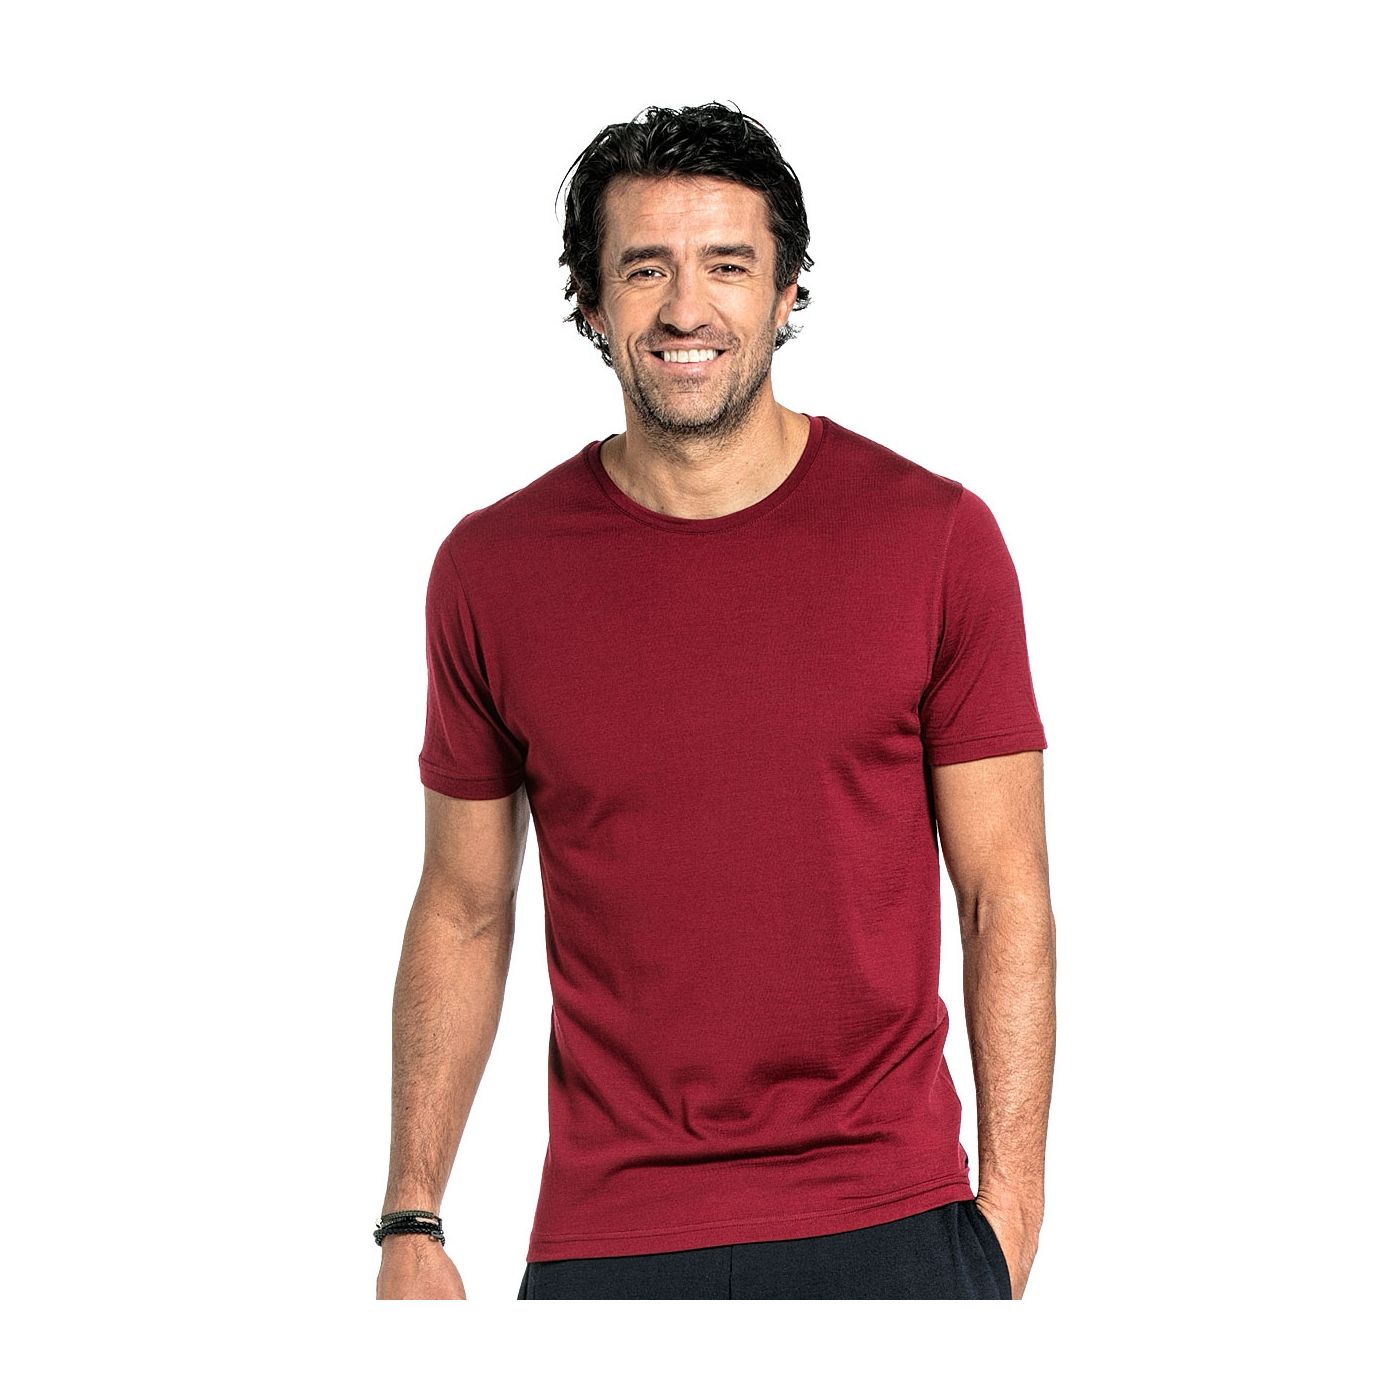 Crew neck T-shirt for men made of Merino wool in Red